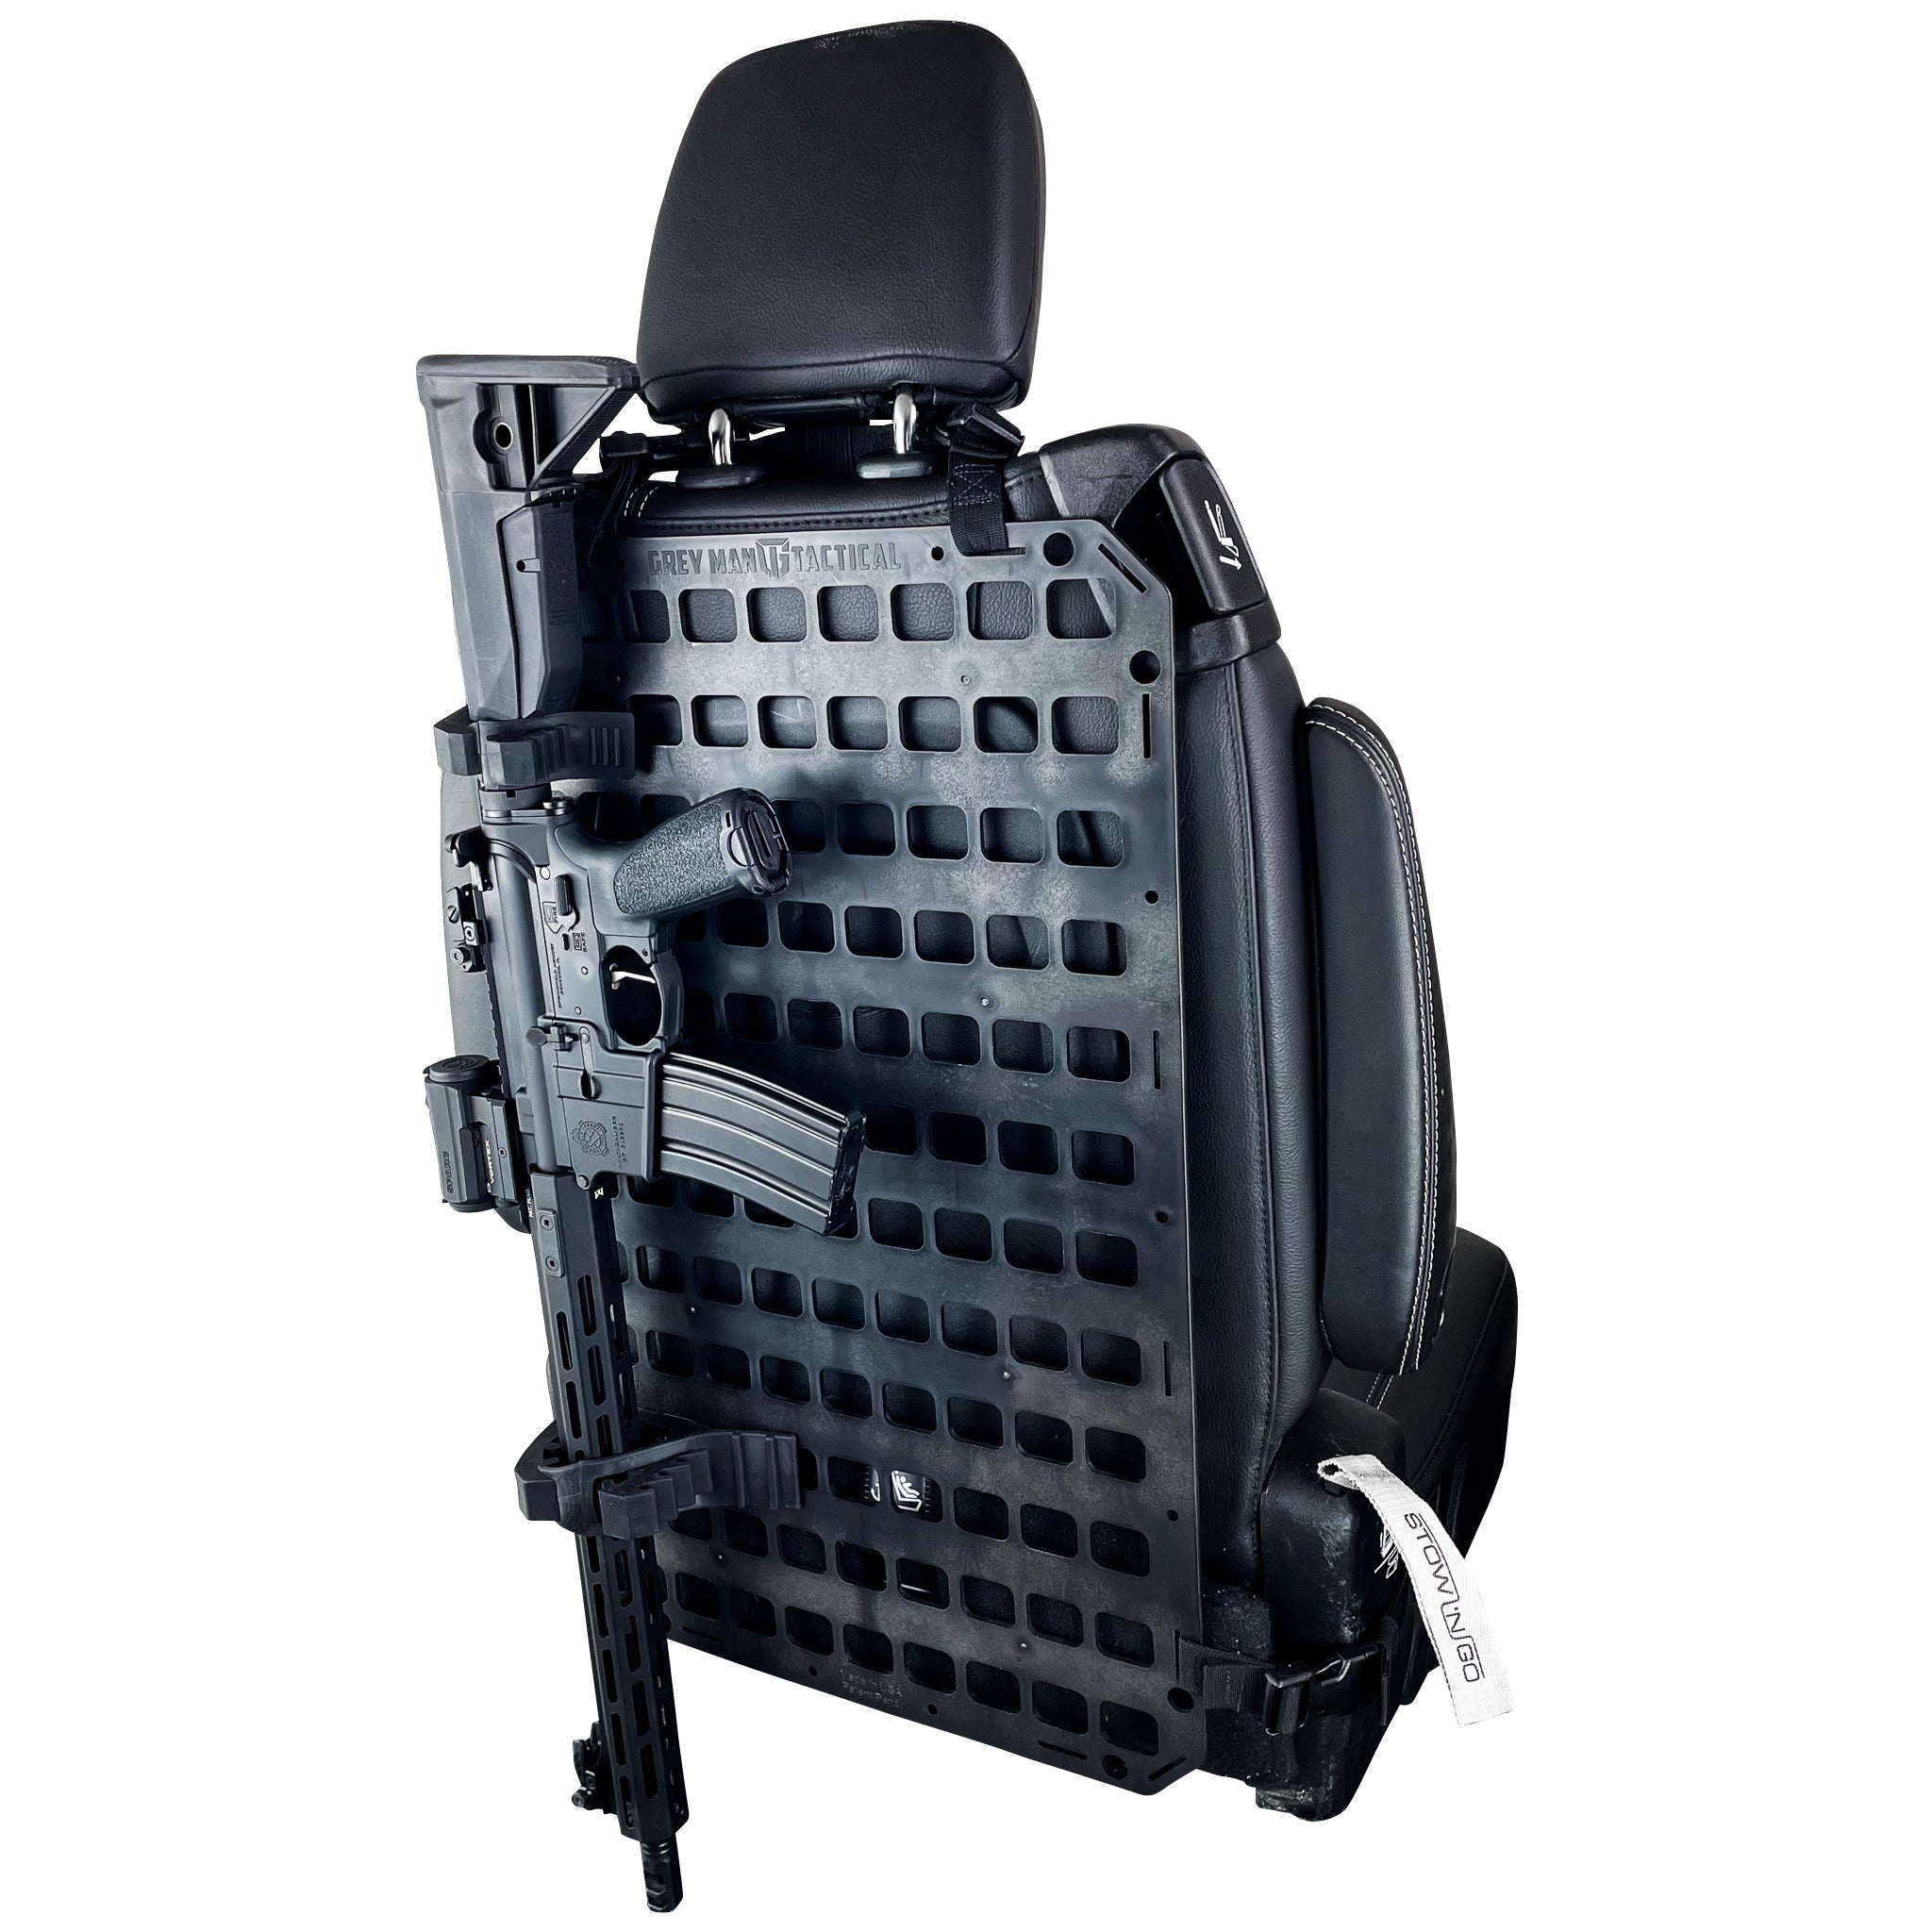 Buy Molle Panel Online In India -  India